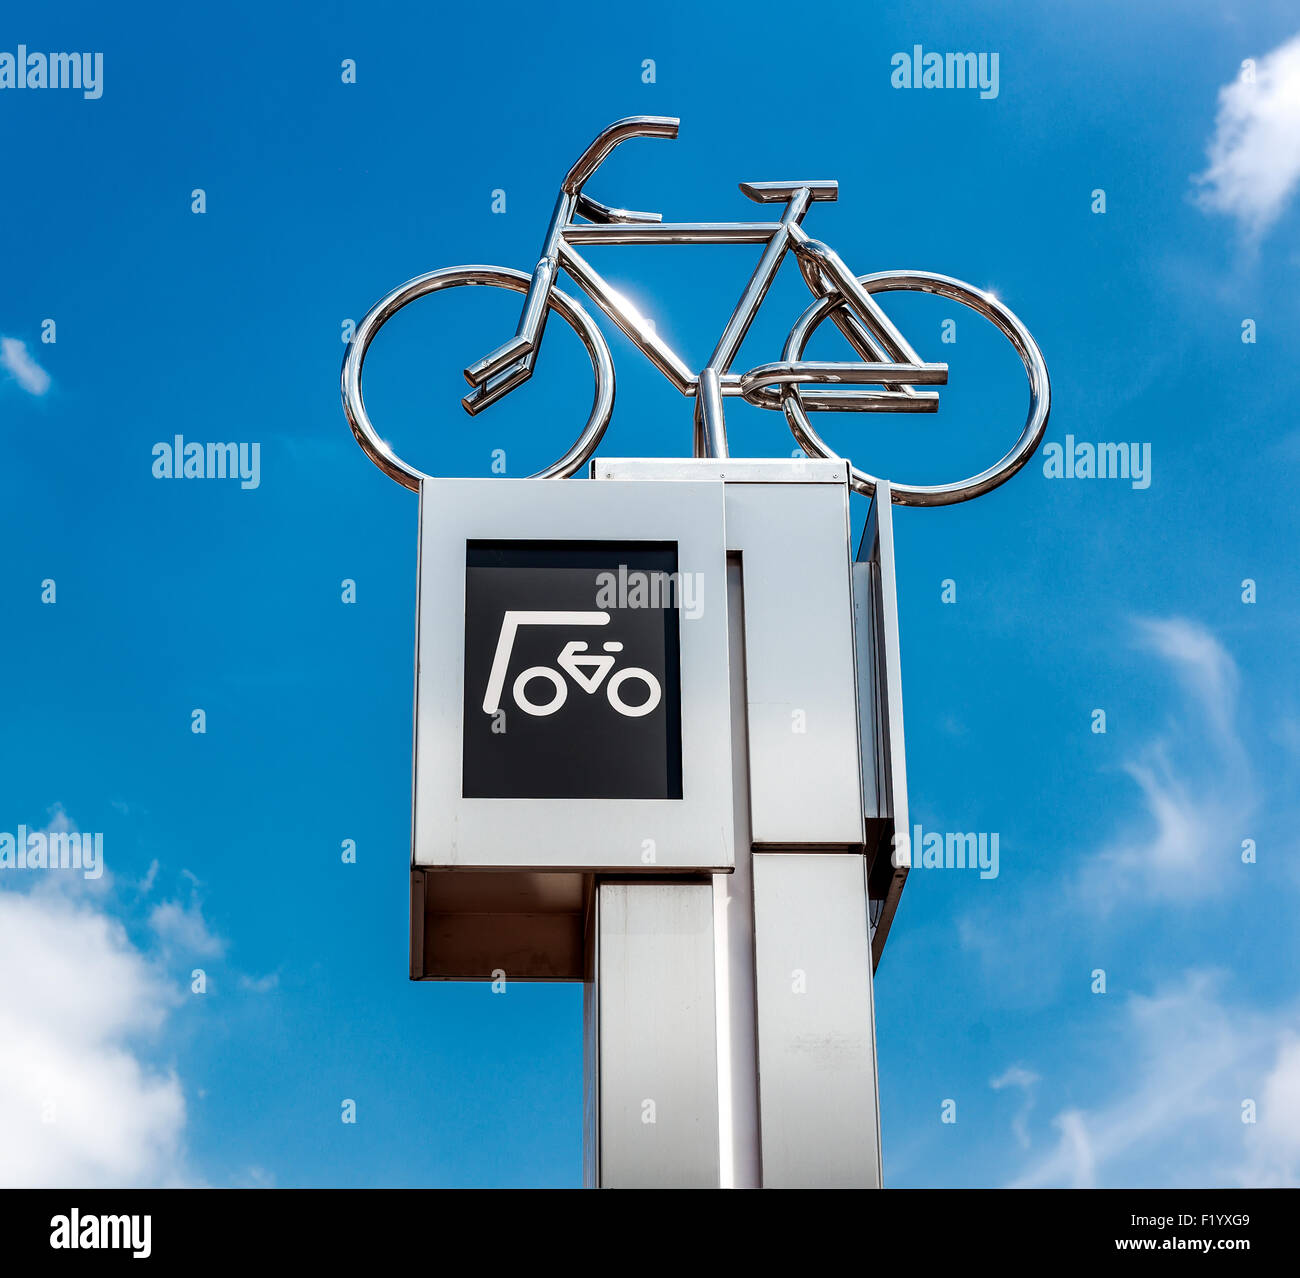 Bicycle parking sign against blue sky background Stock Photo